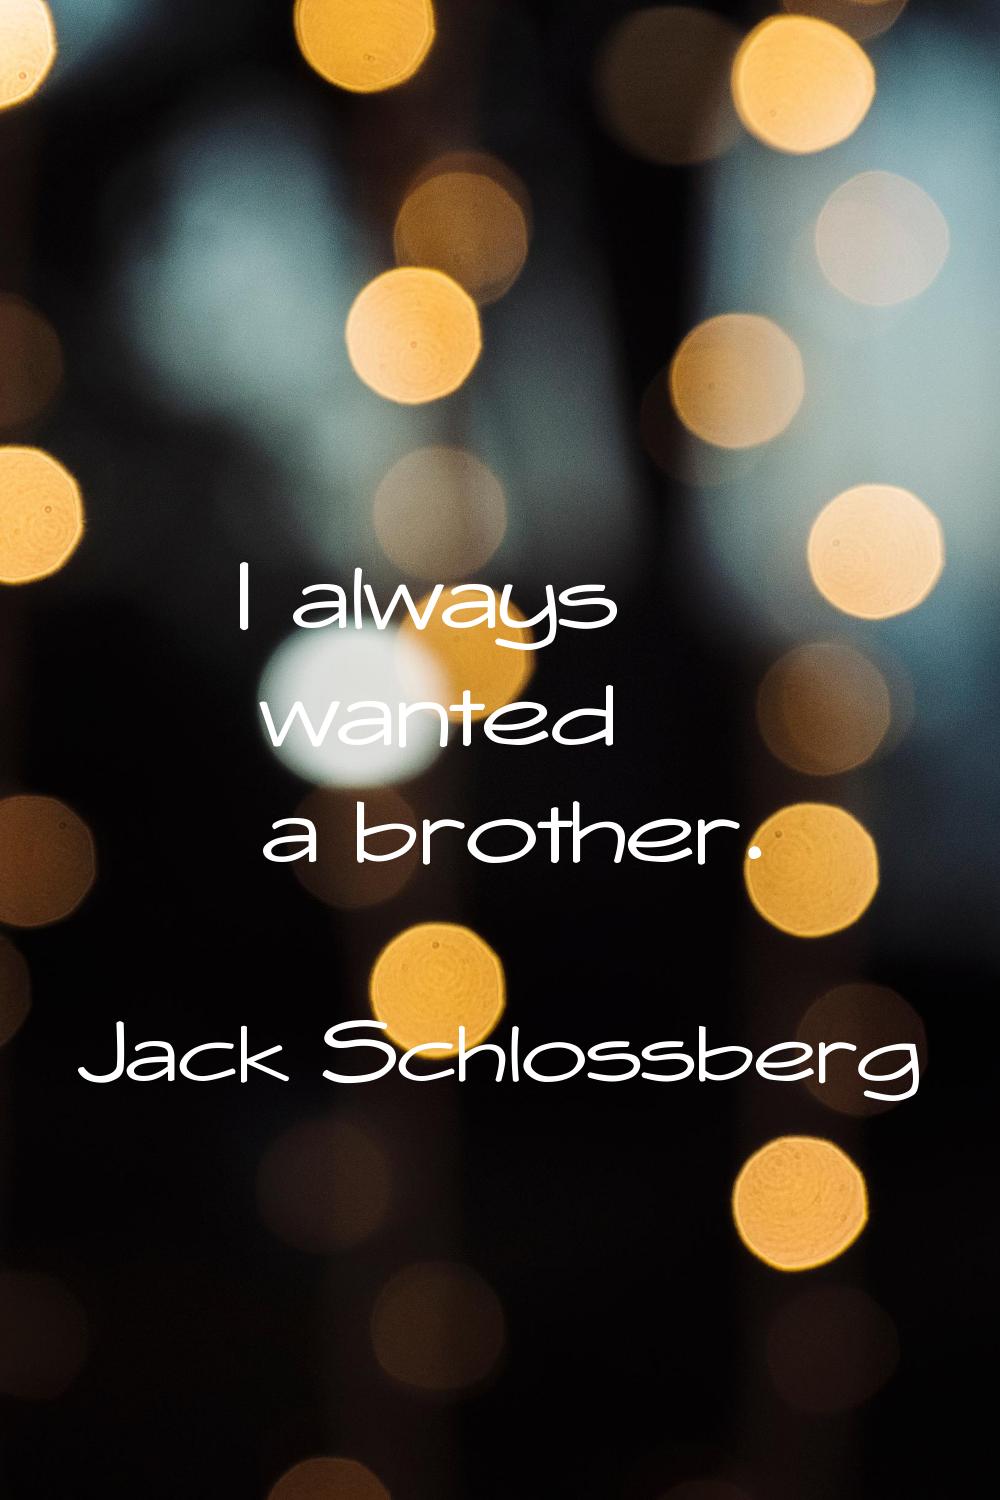 I always wanted a brother.